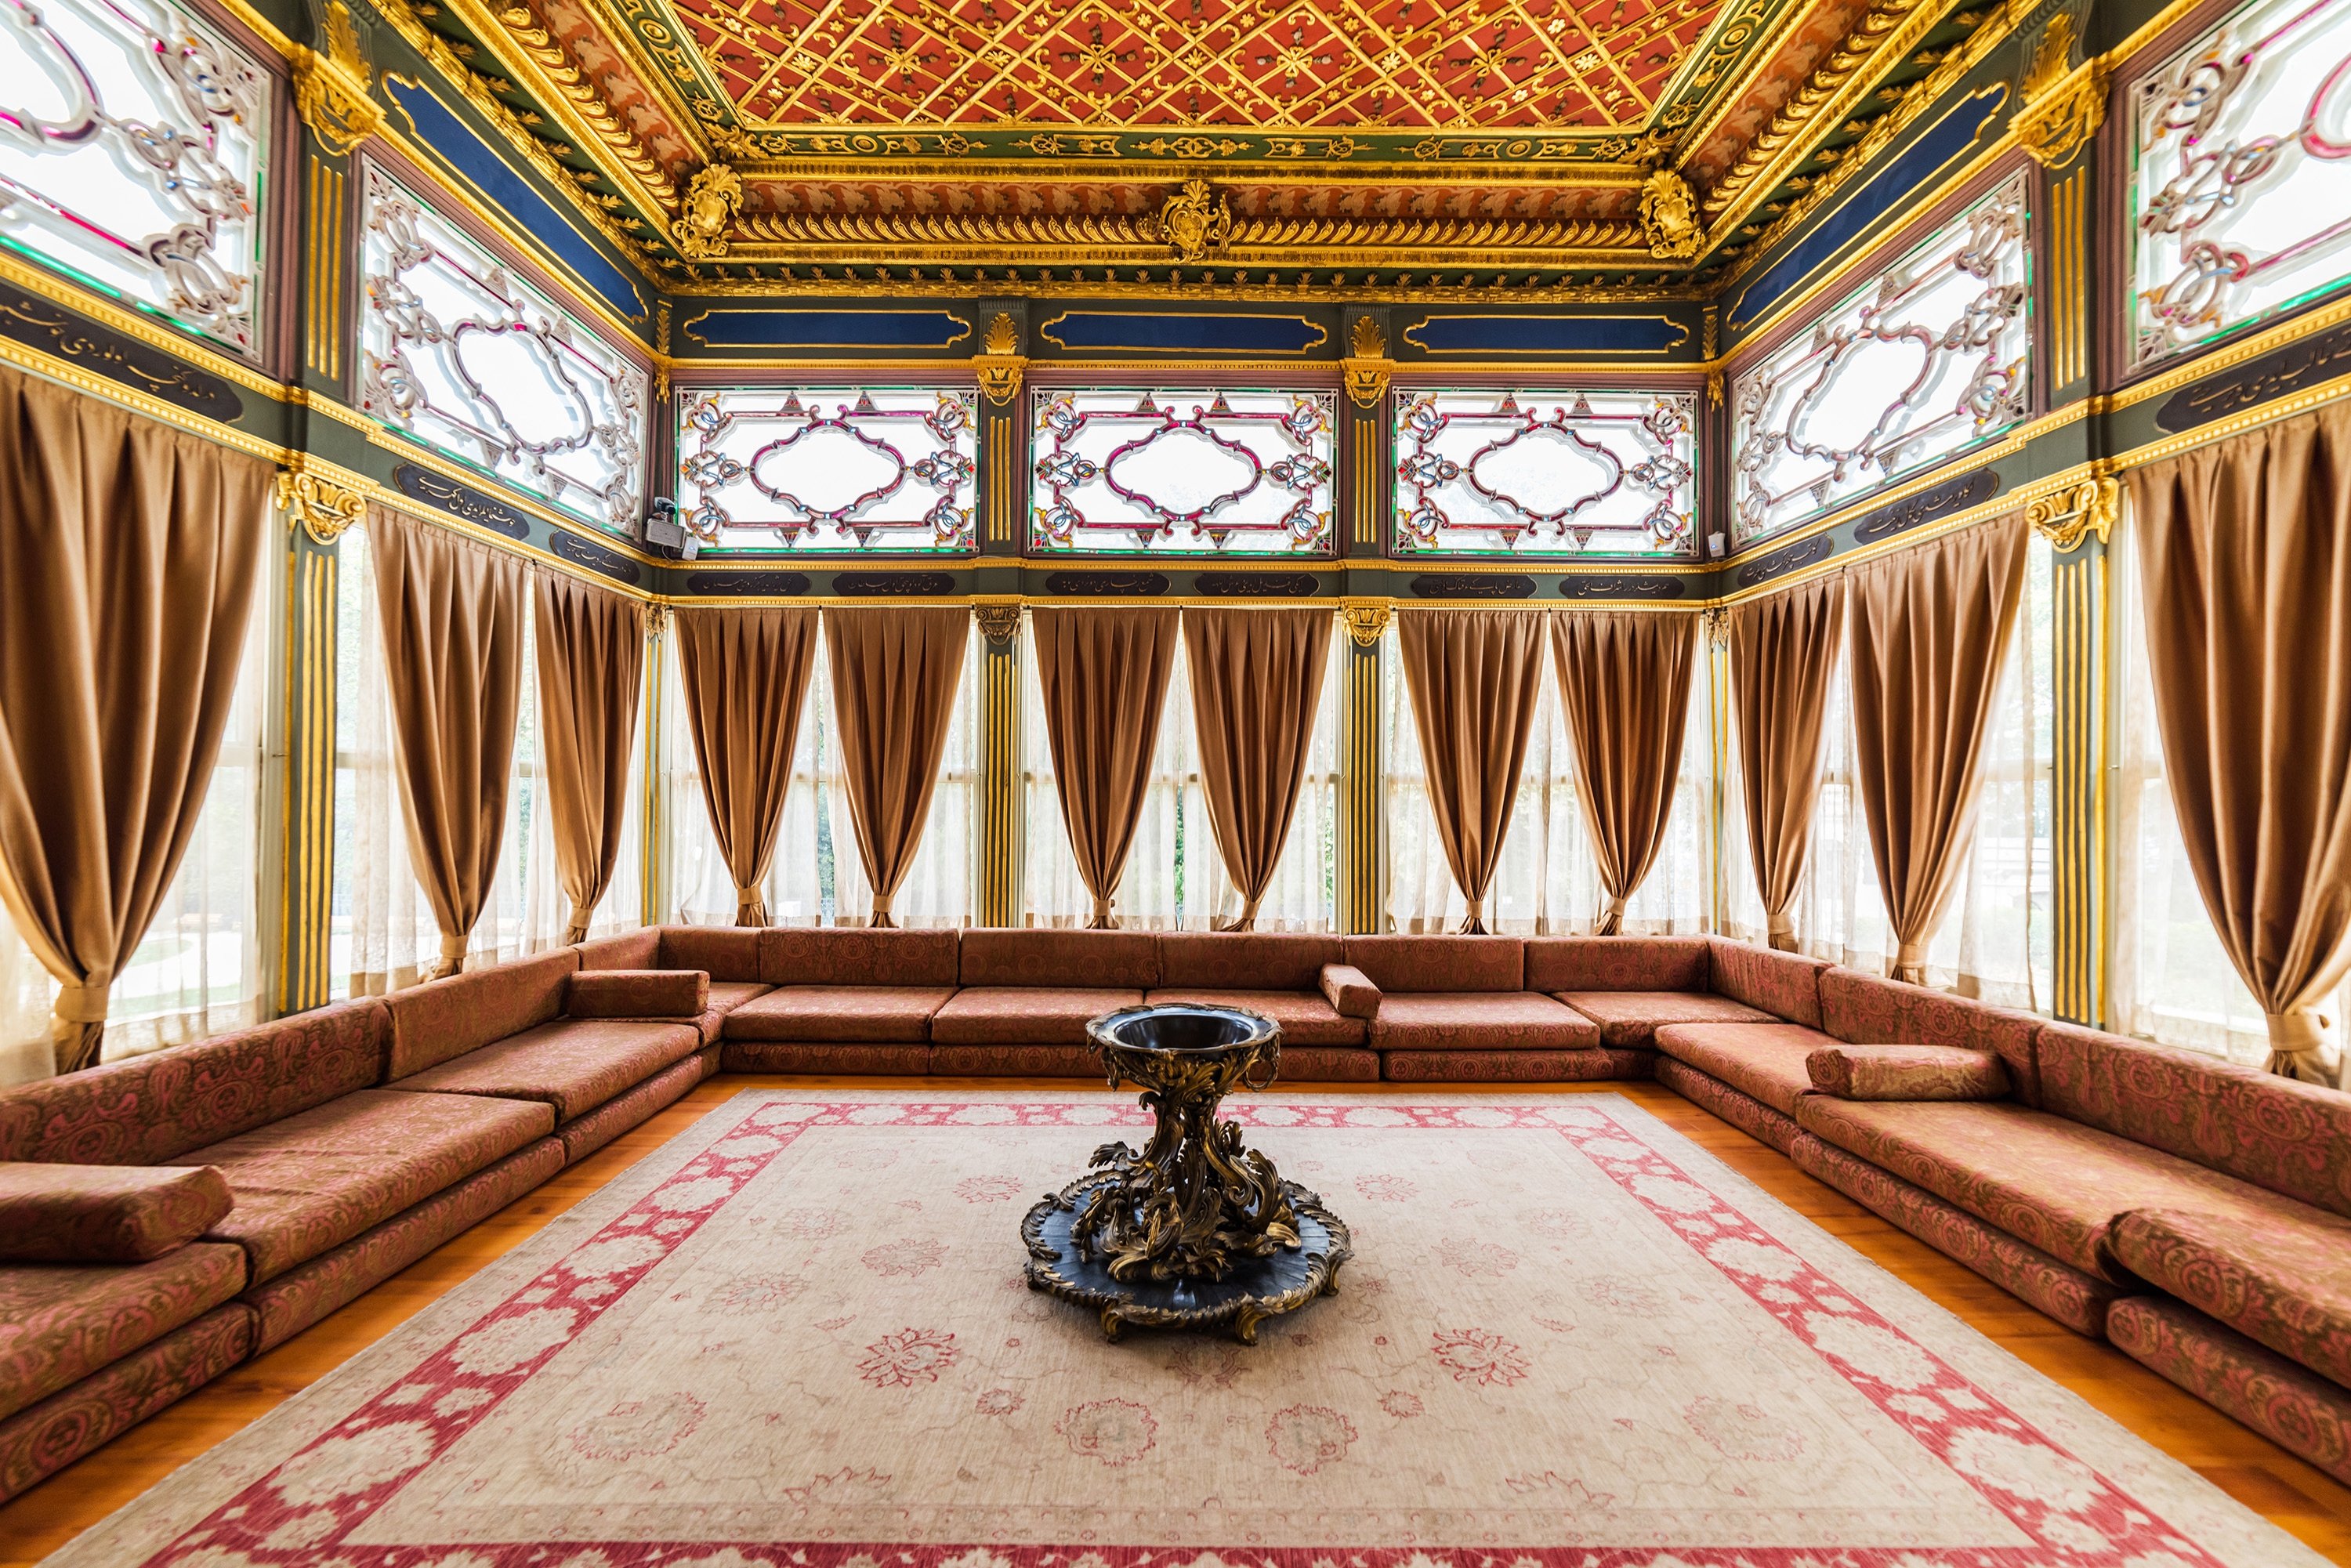 A room with Ottoman decoration in Topkapı Palace, Istanbul. (Shutterstcok Photo)